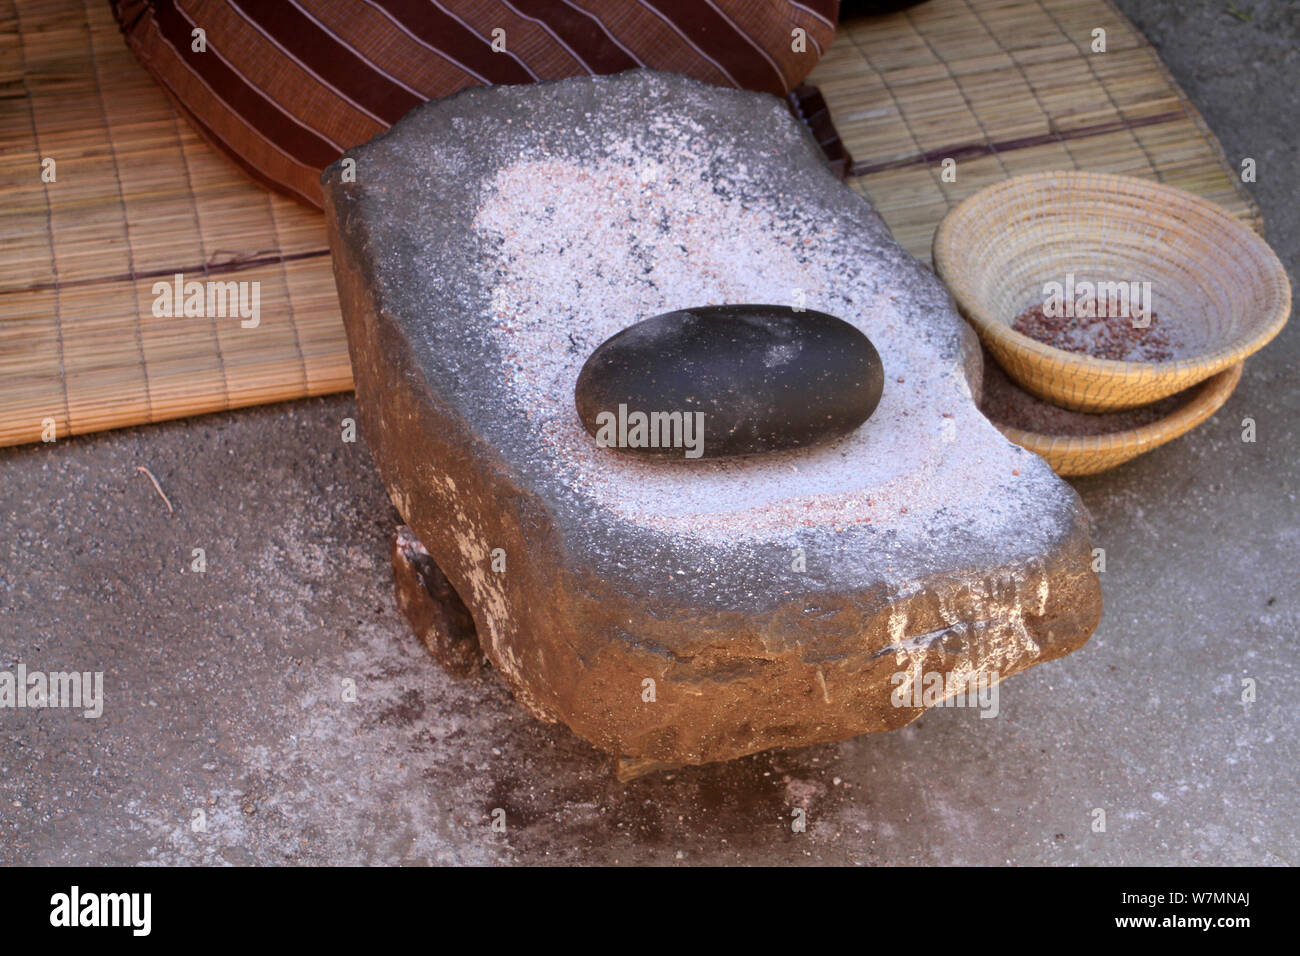 Smooth flat stone and round black stone used to grind maize at Lesedi Cultural Village, Cradle of Humankind, South Africa Stock Photo